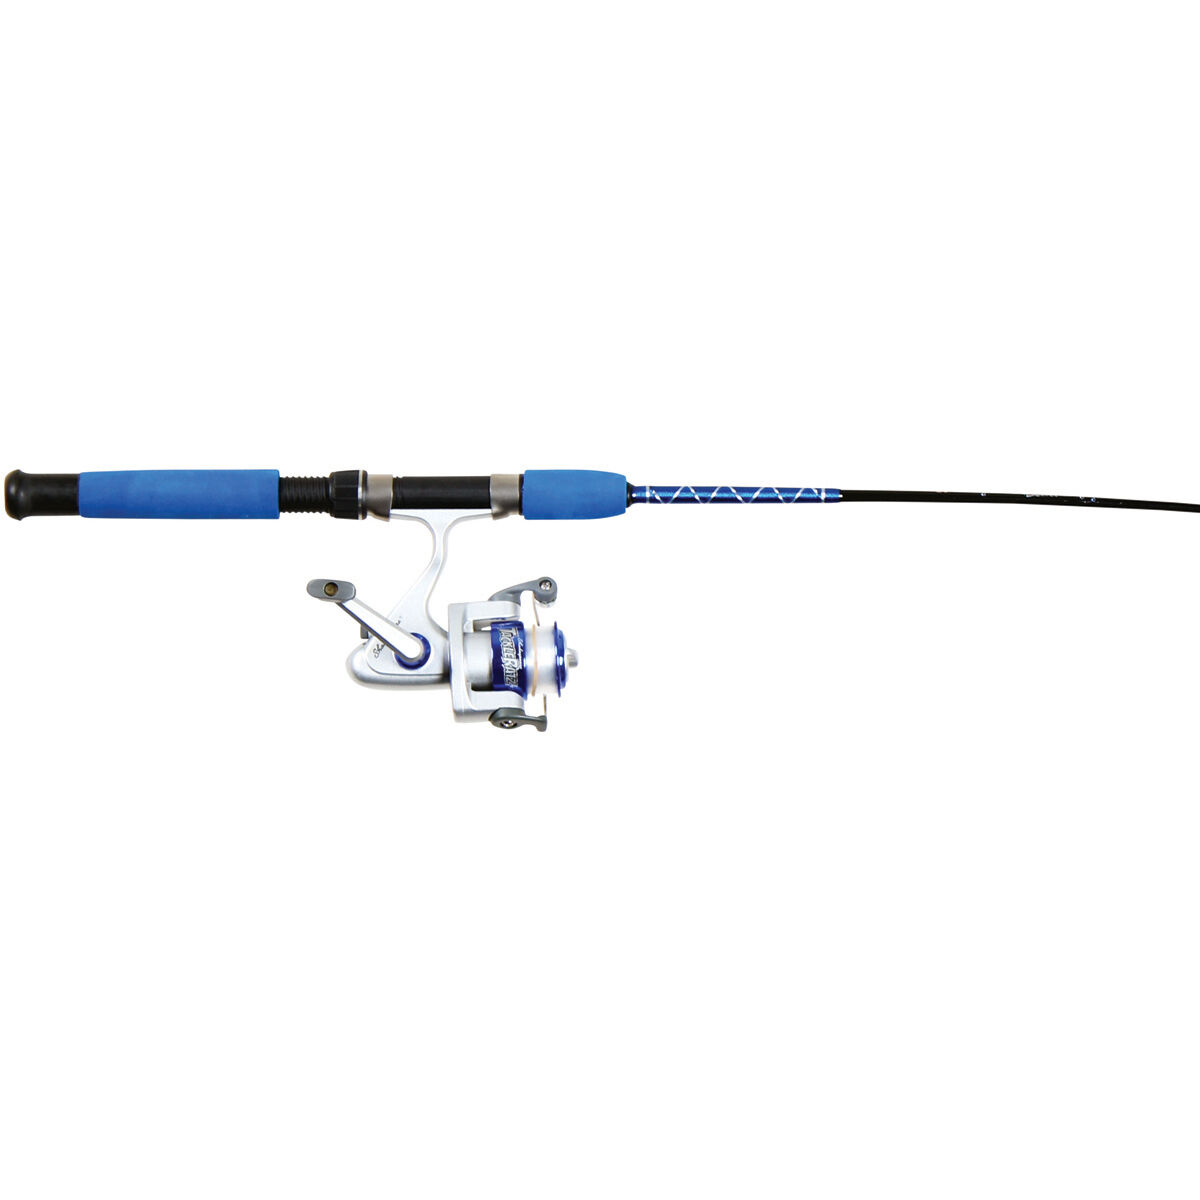  Kids Fishing Rod Set Multifunctional Retractable Kids Fishing  Rod Reel, Kids Fishing Starter Kit for Boys, Girls or Teens : Sports &  Outdoors